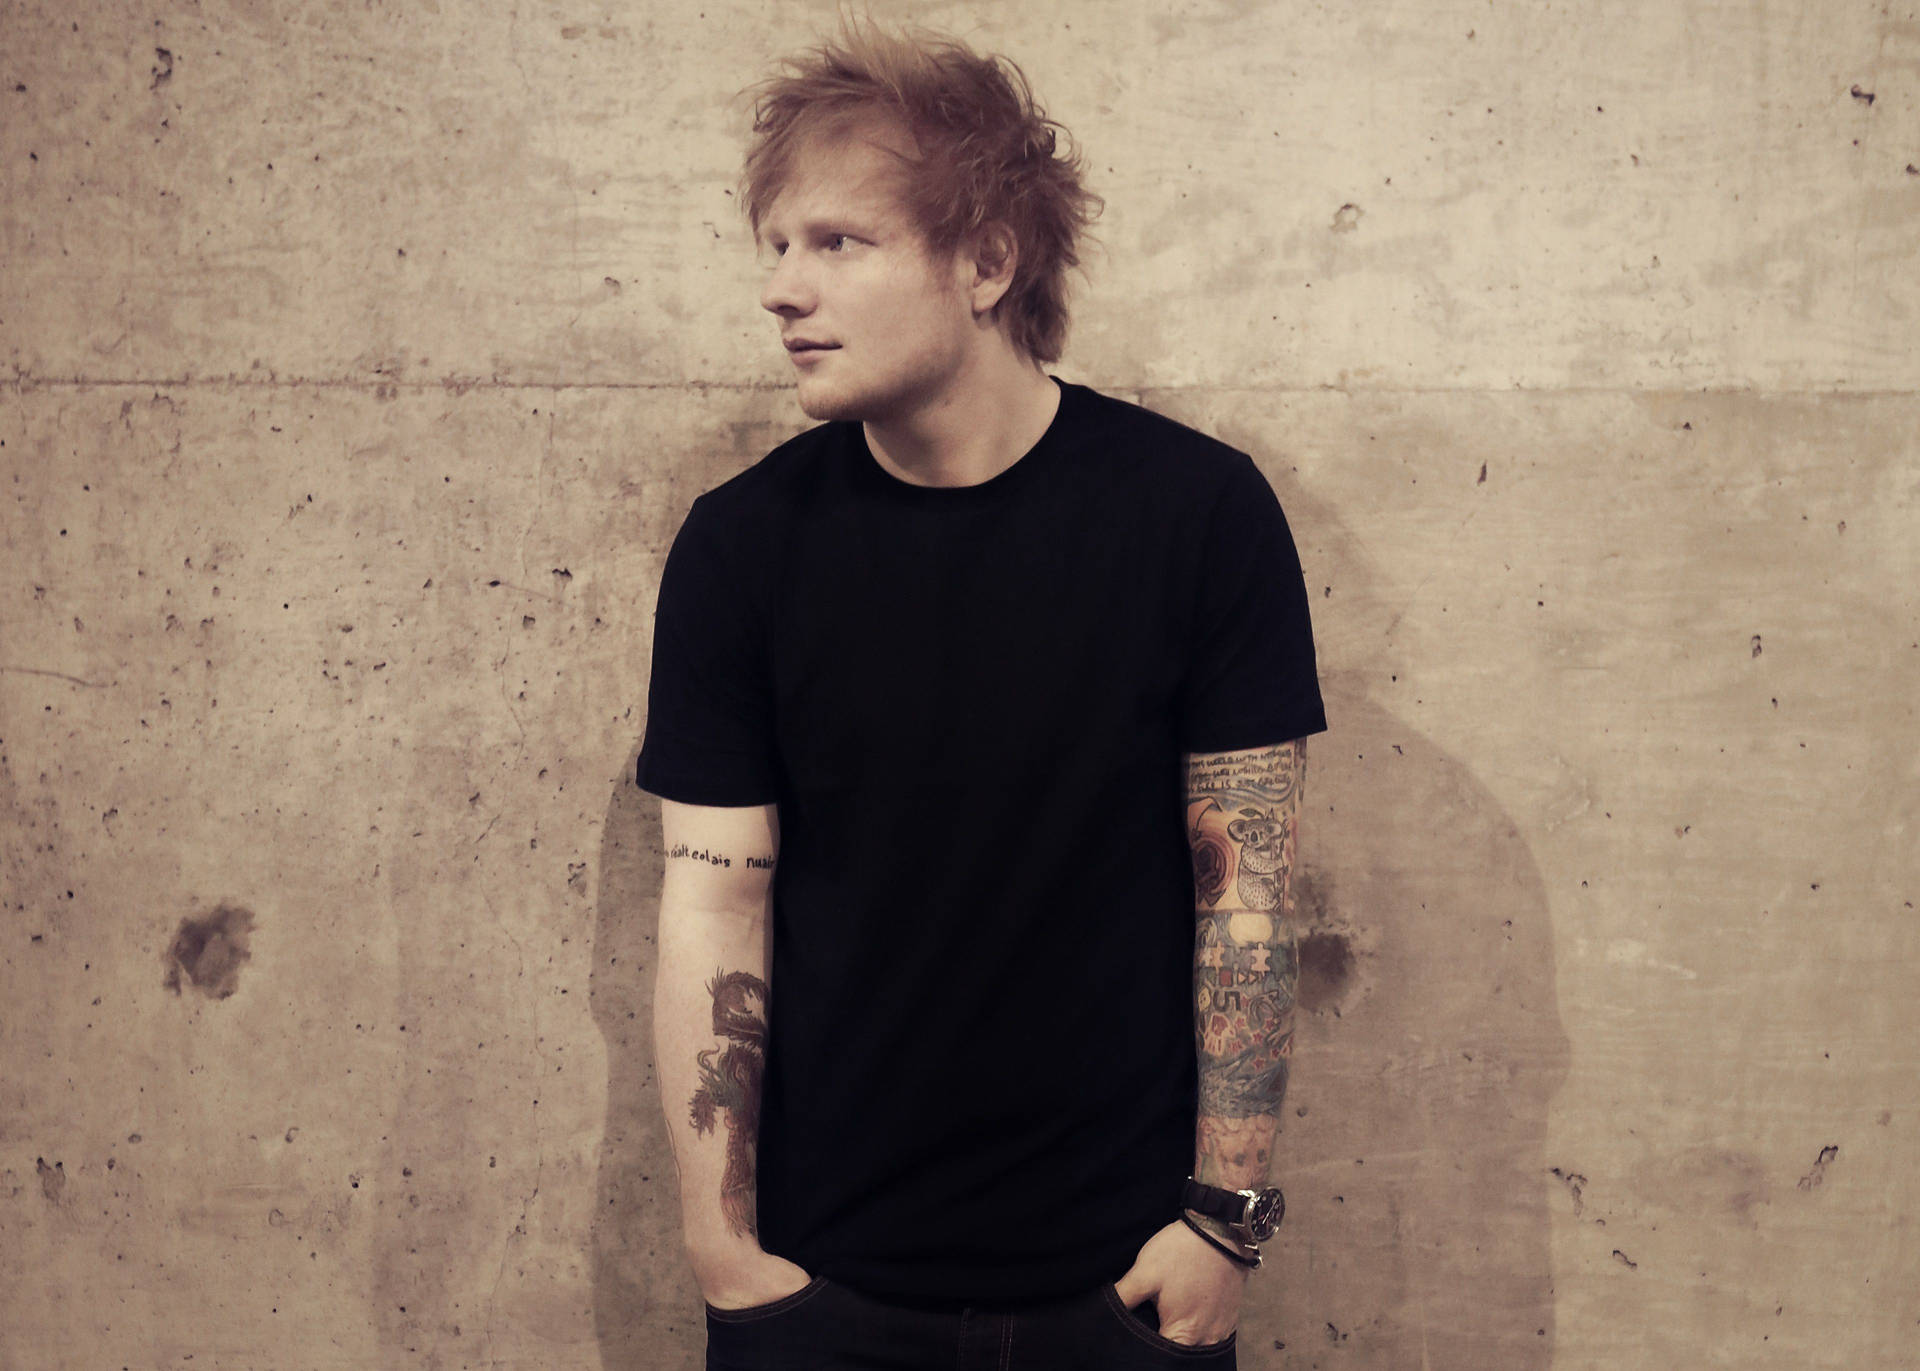 Ed Sheeran is ready for his fans. Wallpaper